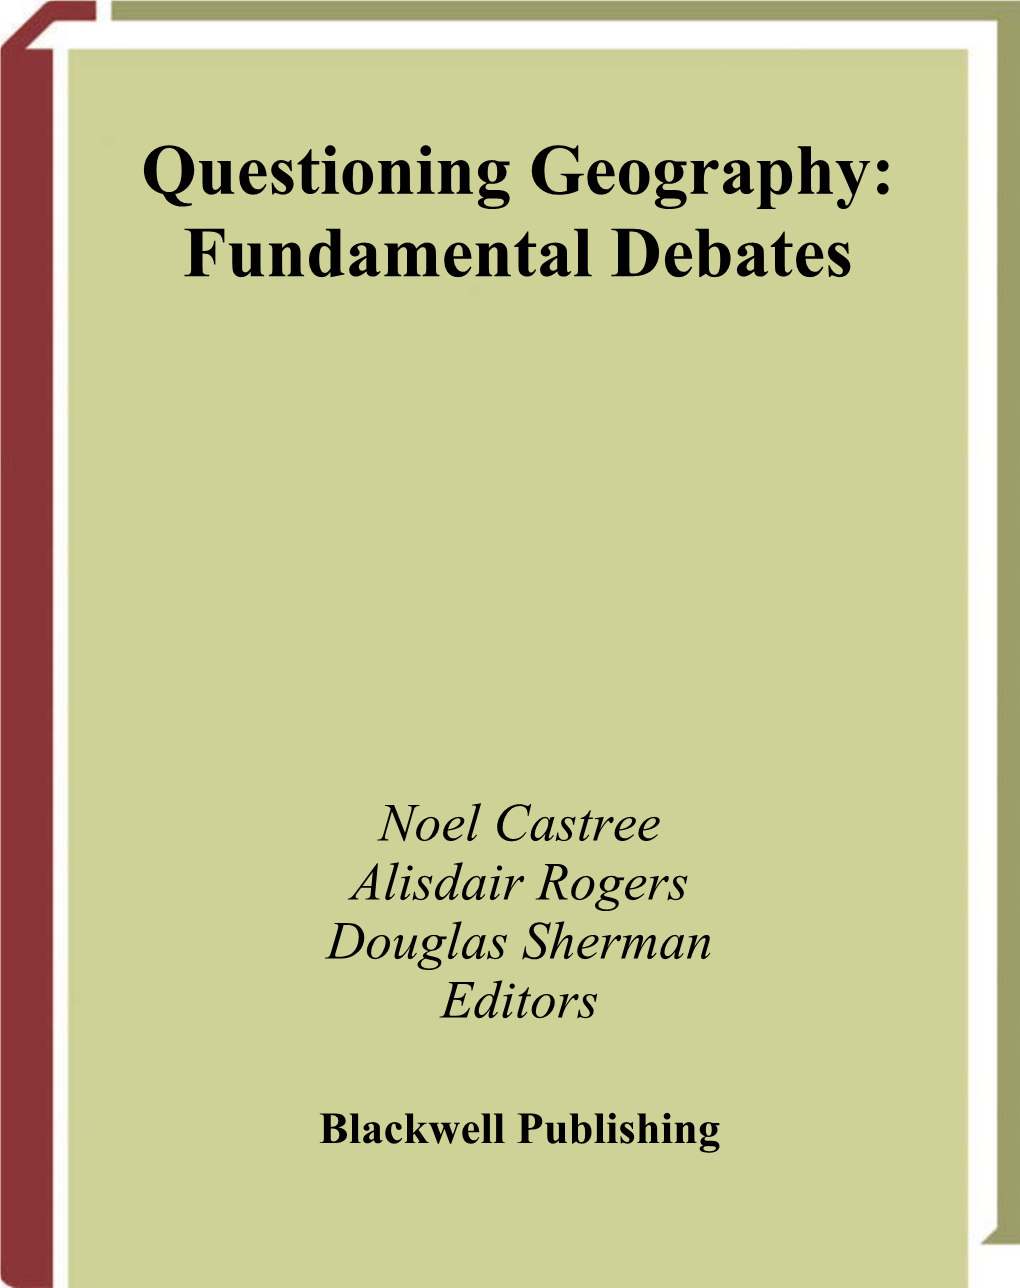 Questioning Geography : Fundamental Debates : Essays on a Contested Discipline / Edited by Noel Castree, Alisdair Rogers, and Douglas Sherman